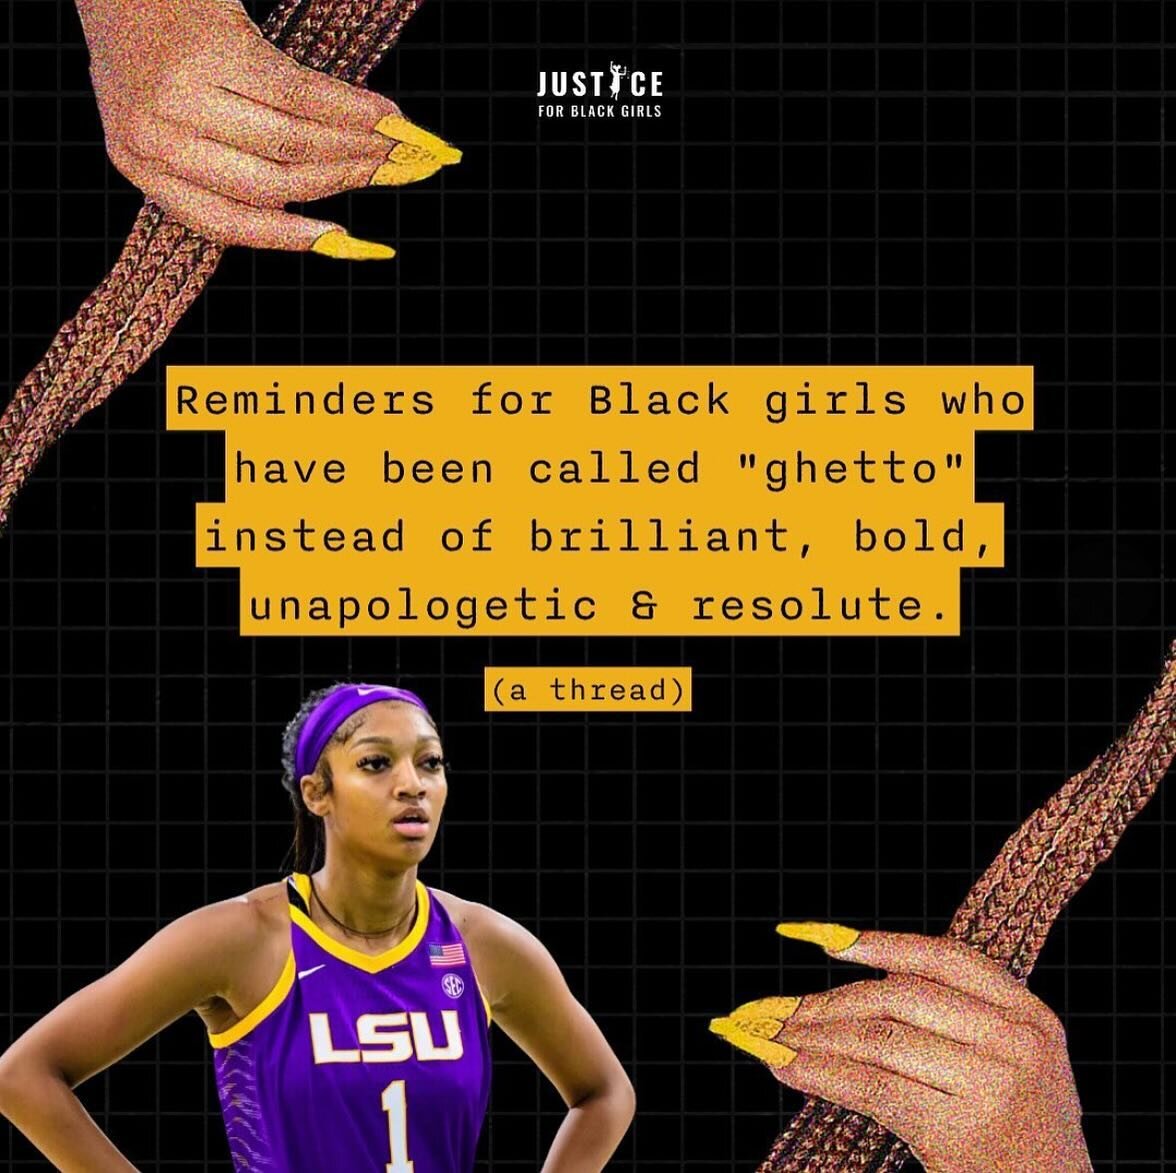 This time last year Angel made mainstream headlines for being a champion- and doing so being her authentic self. This year LSU rematches Iowa during March Madness and we&rsquo;re reamplifying these reminders for anyone who needs them.💜💛

Dear Black